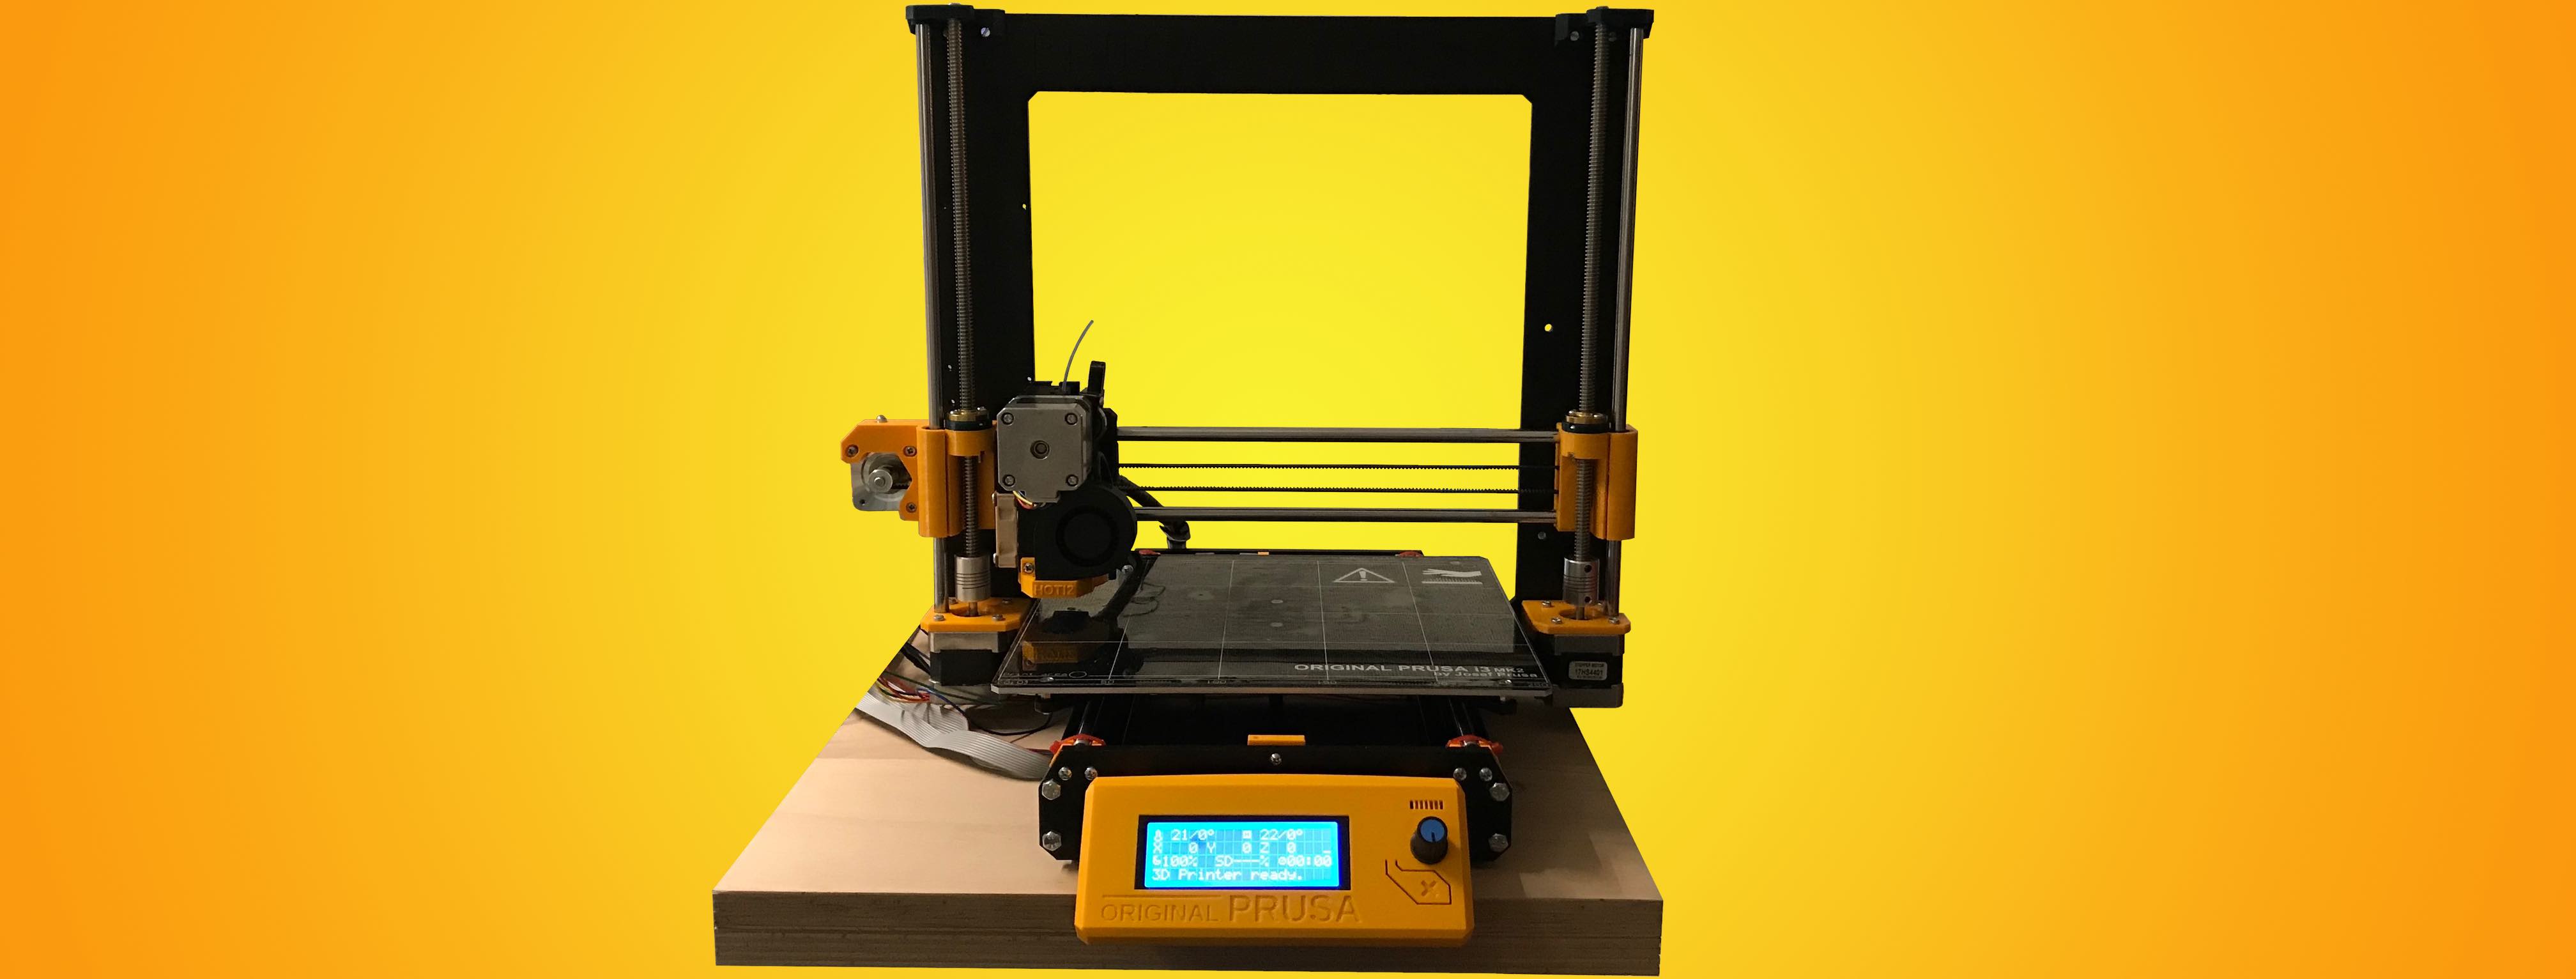 'Final' assembly of the Prusa i3 MK3 clone 3D-Printer, lessons learned and conclusions feature image